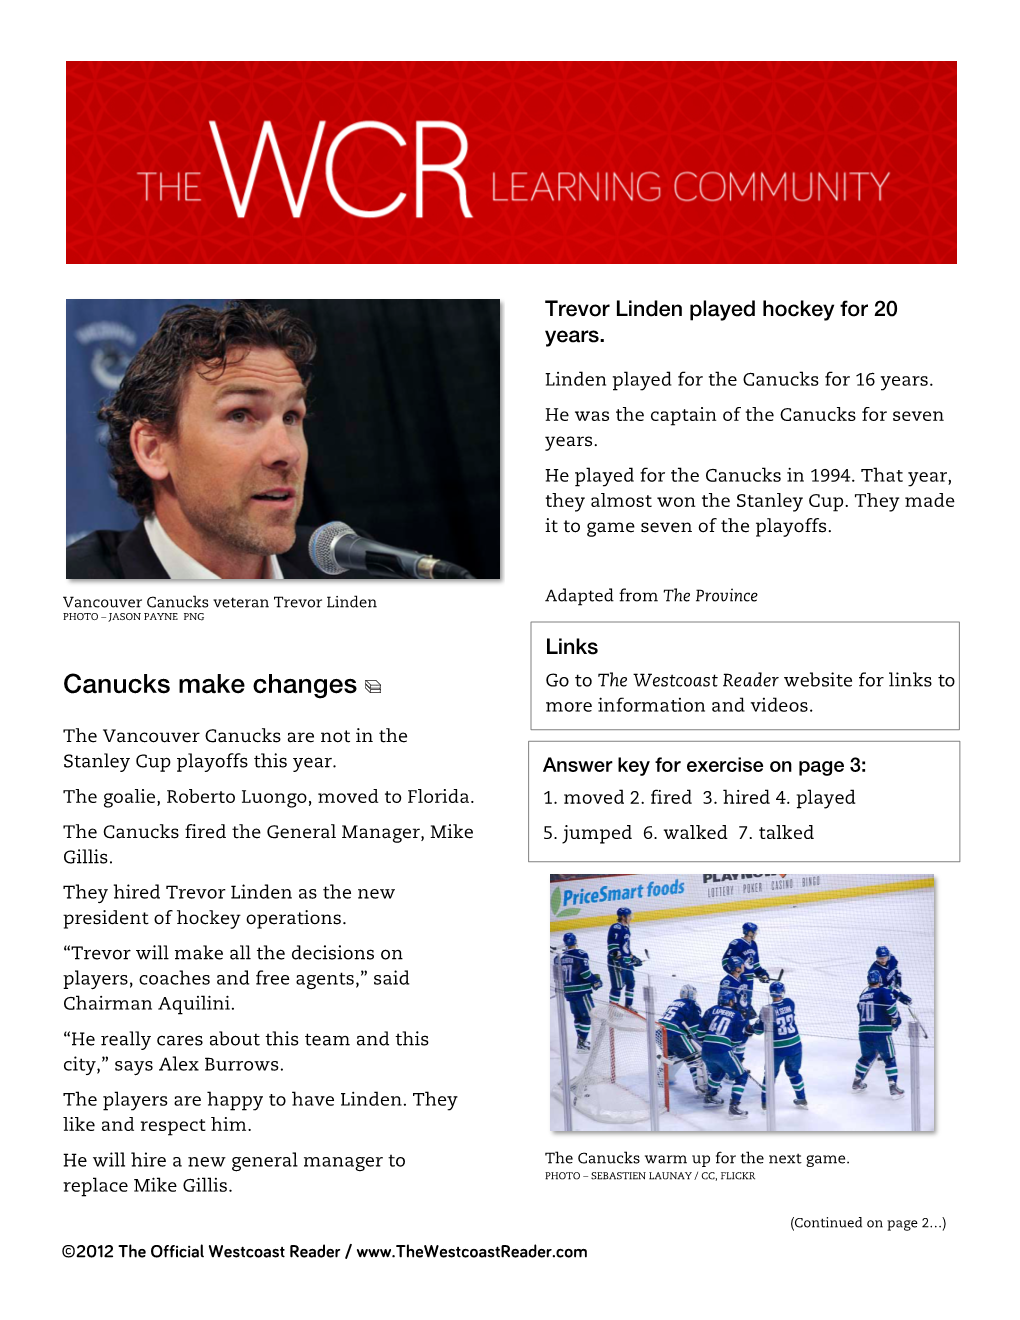 Canucks Make Changes Go to the Westcoast Reader Website for Links to More Information and Videos